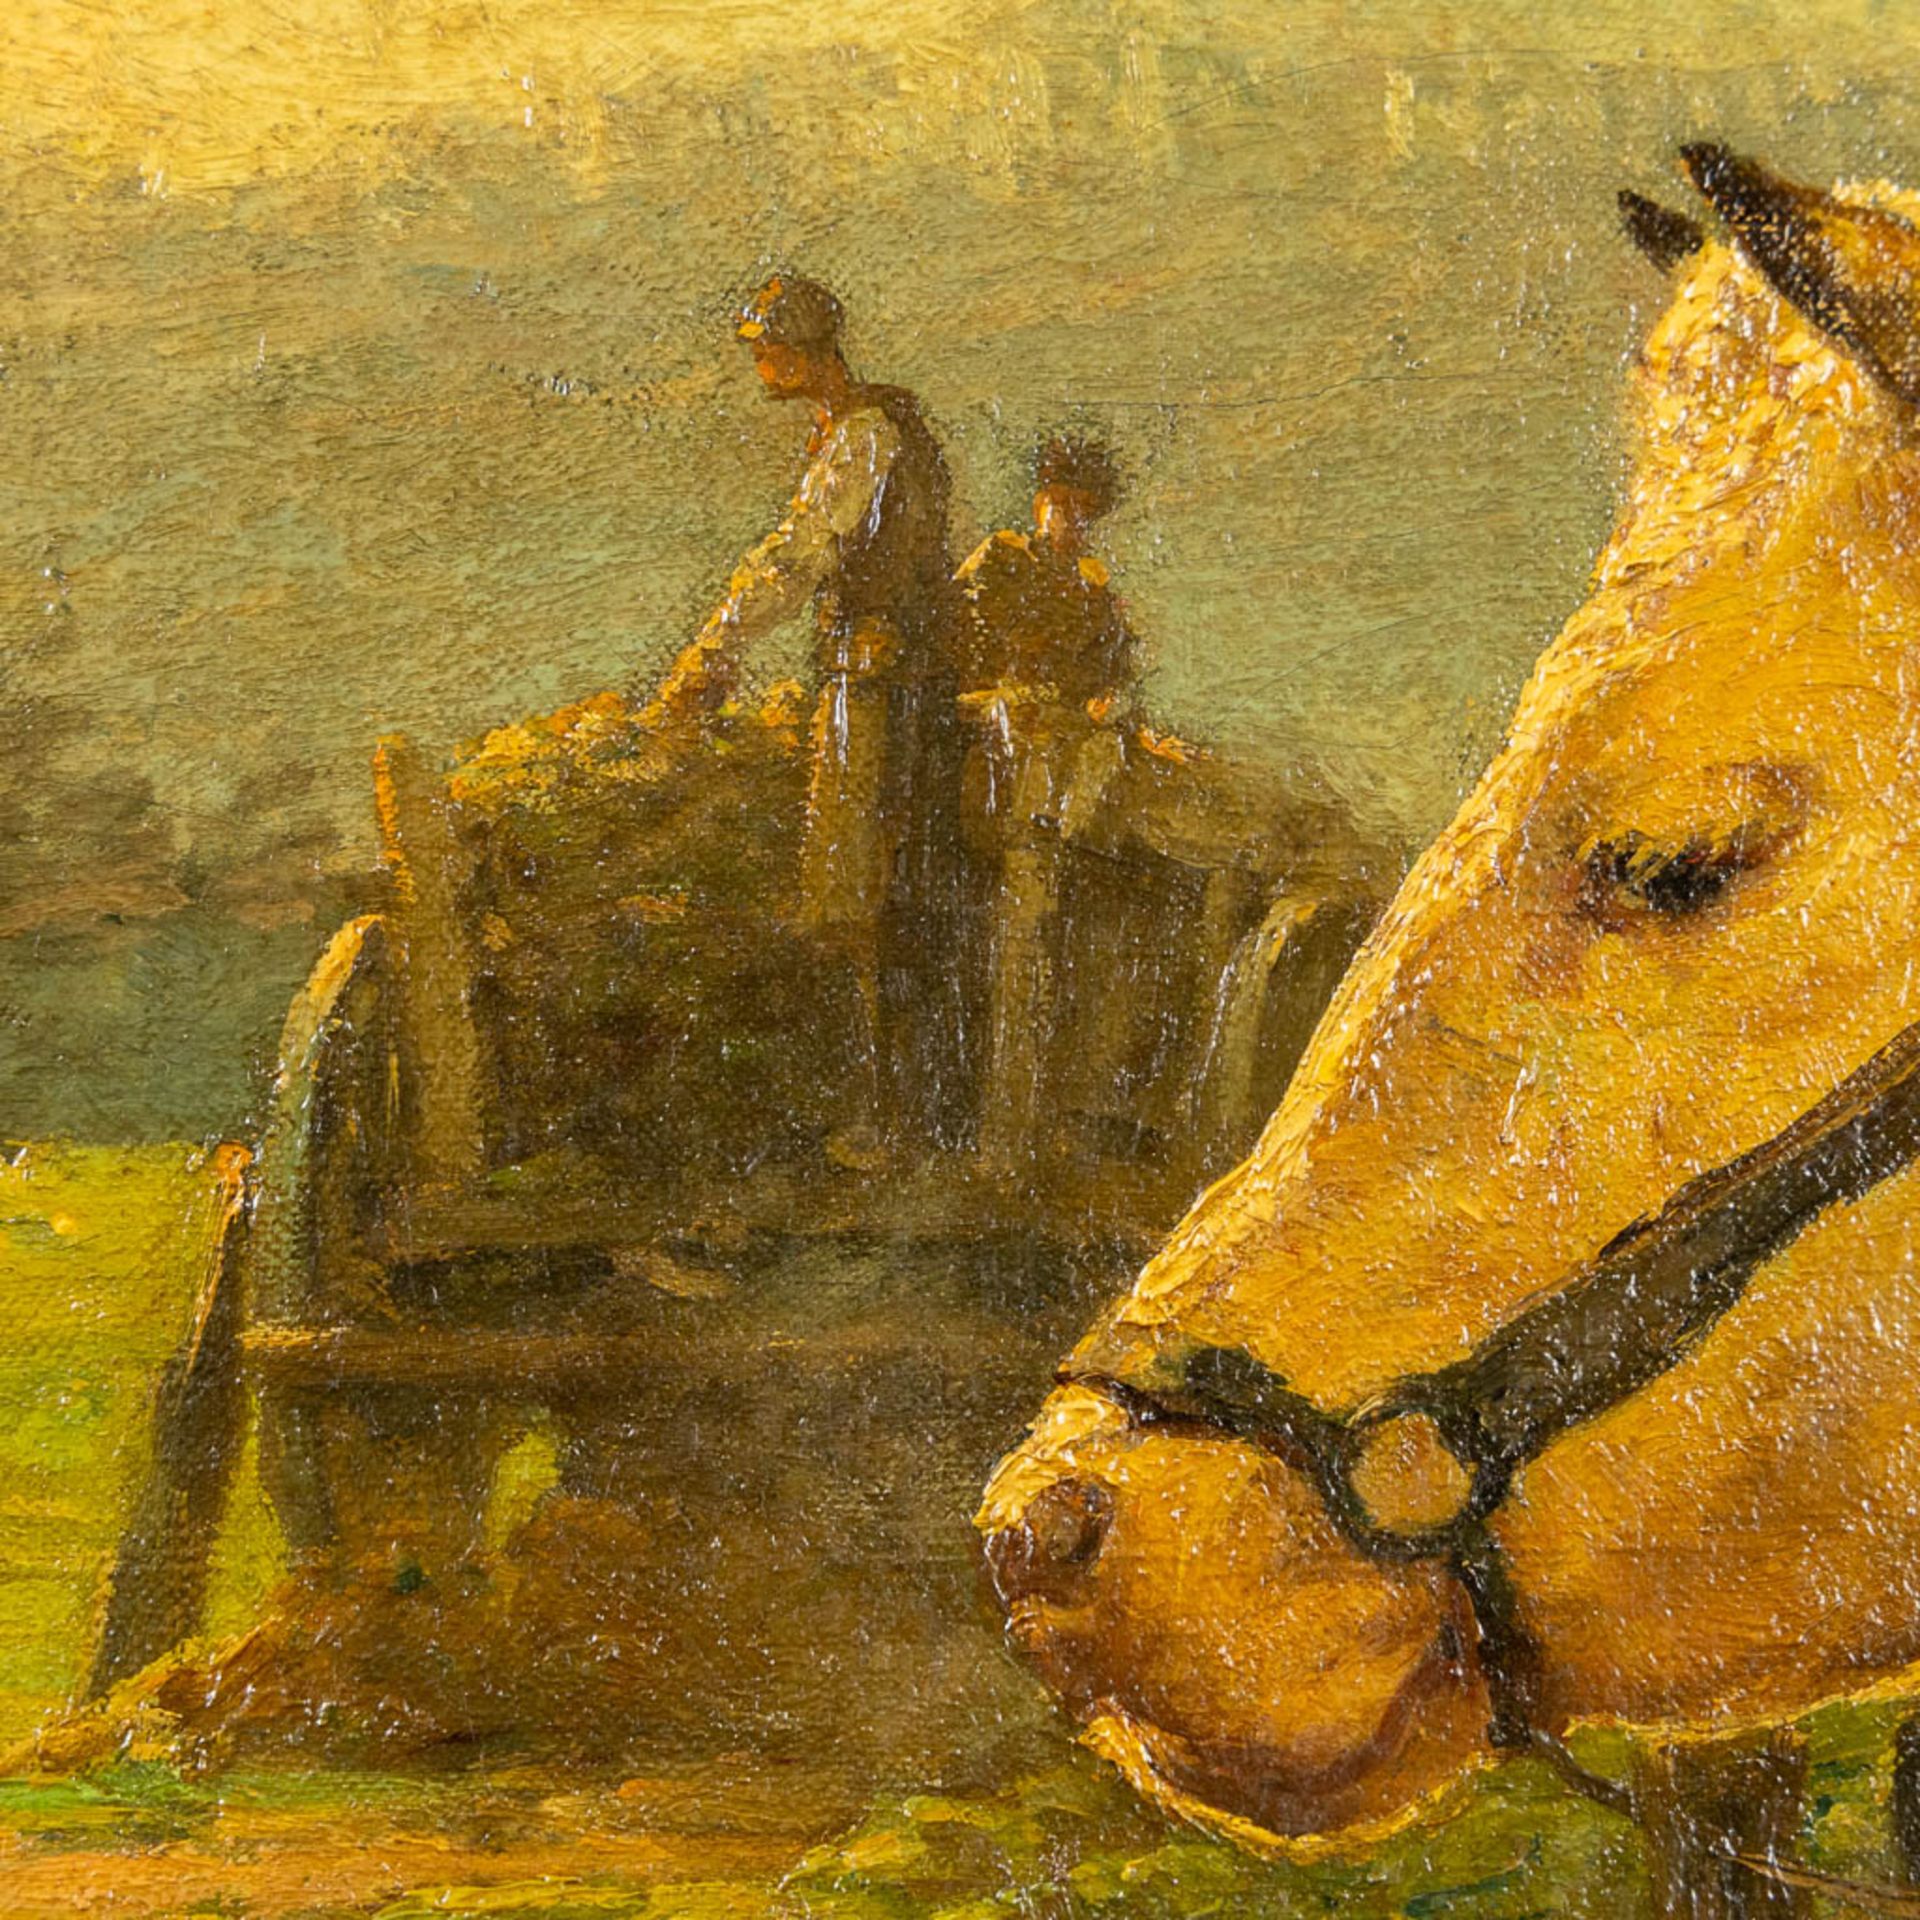 Adolphe JACOBS (1859-1940) 'Cattle hauling a cart' oil on canvas. (W:92 x H:71 cm) - Image 6 of 9